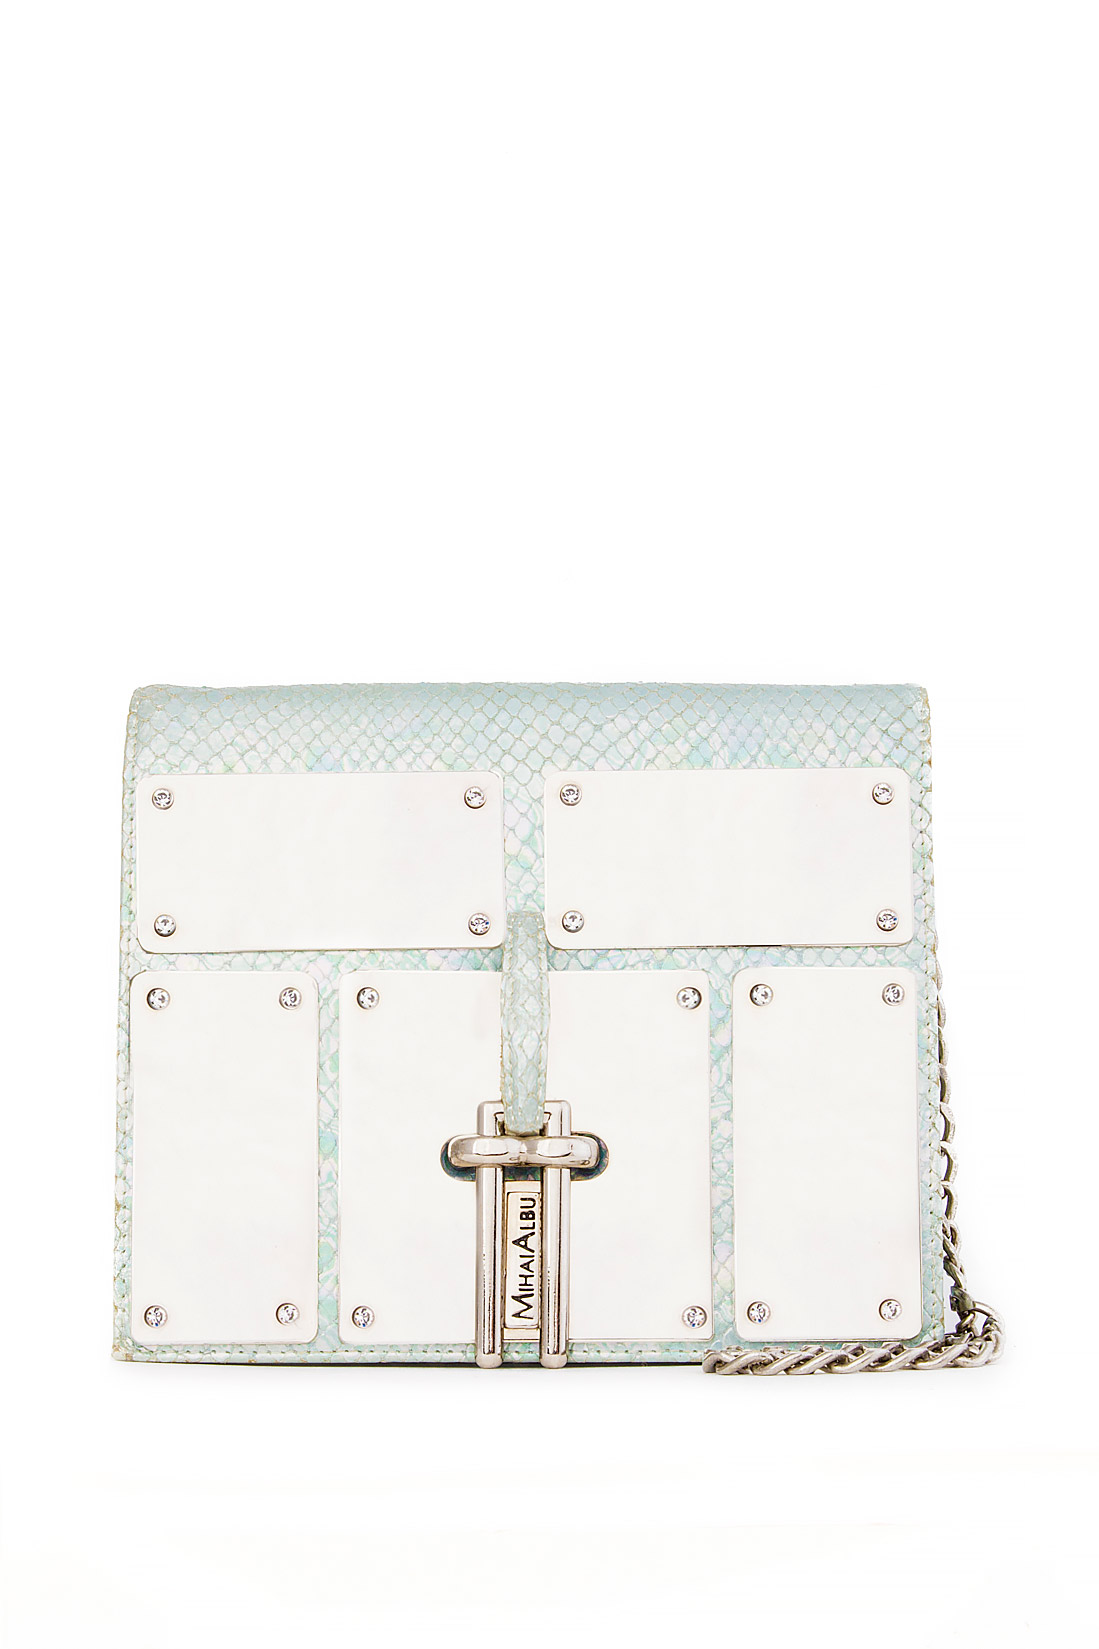 Textured-leather clutch embossed with metallic mirrors Mihai Albu image 0